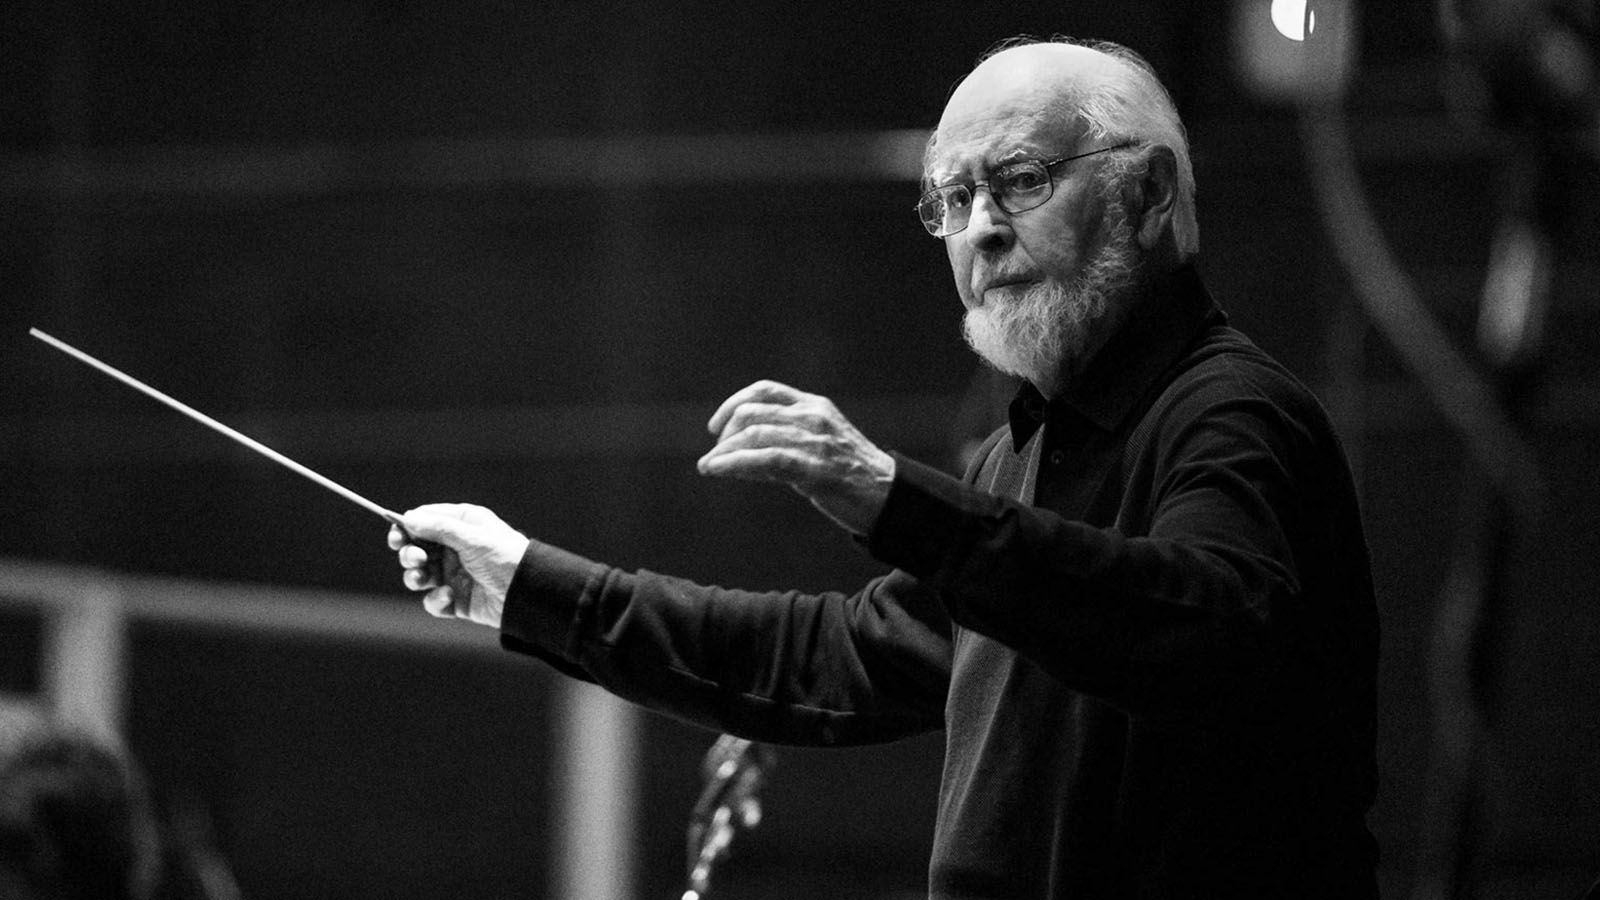 The Fort Wayne Philharmonic will be tribute to composer John Williams on Nov. 12.